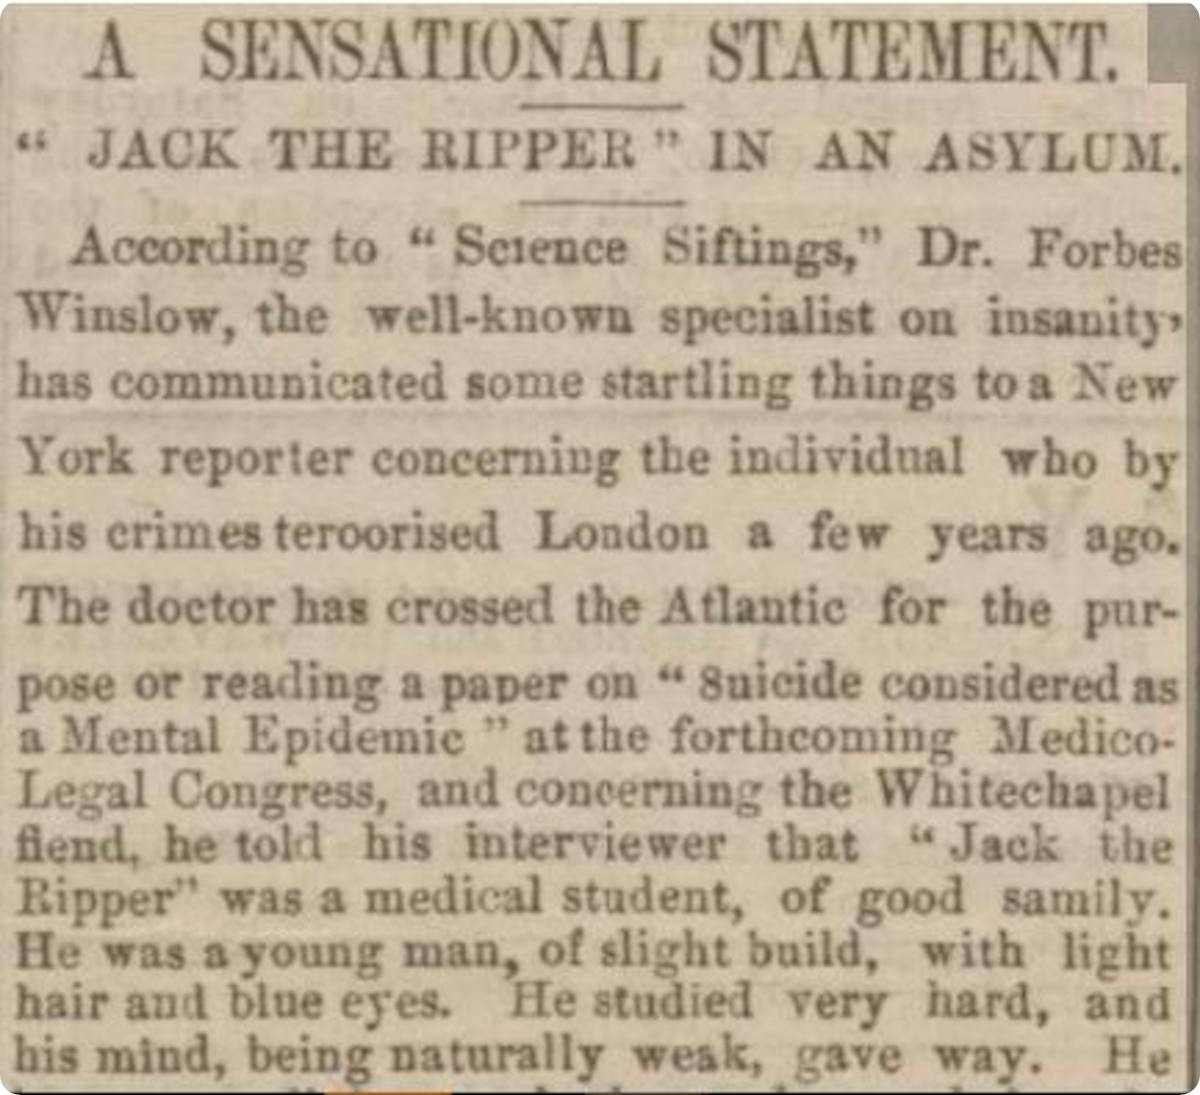 Forbes Winslow in newspaper reports